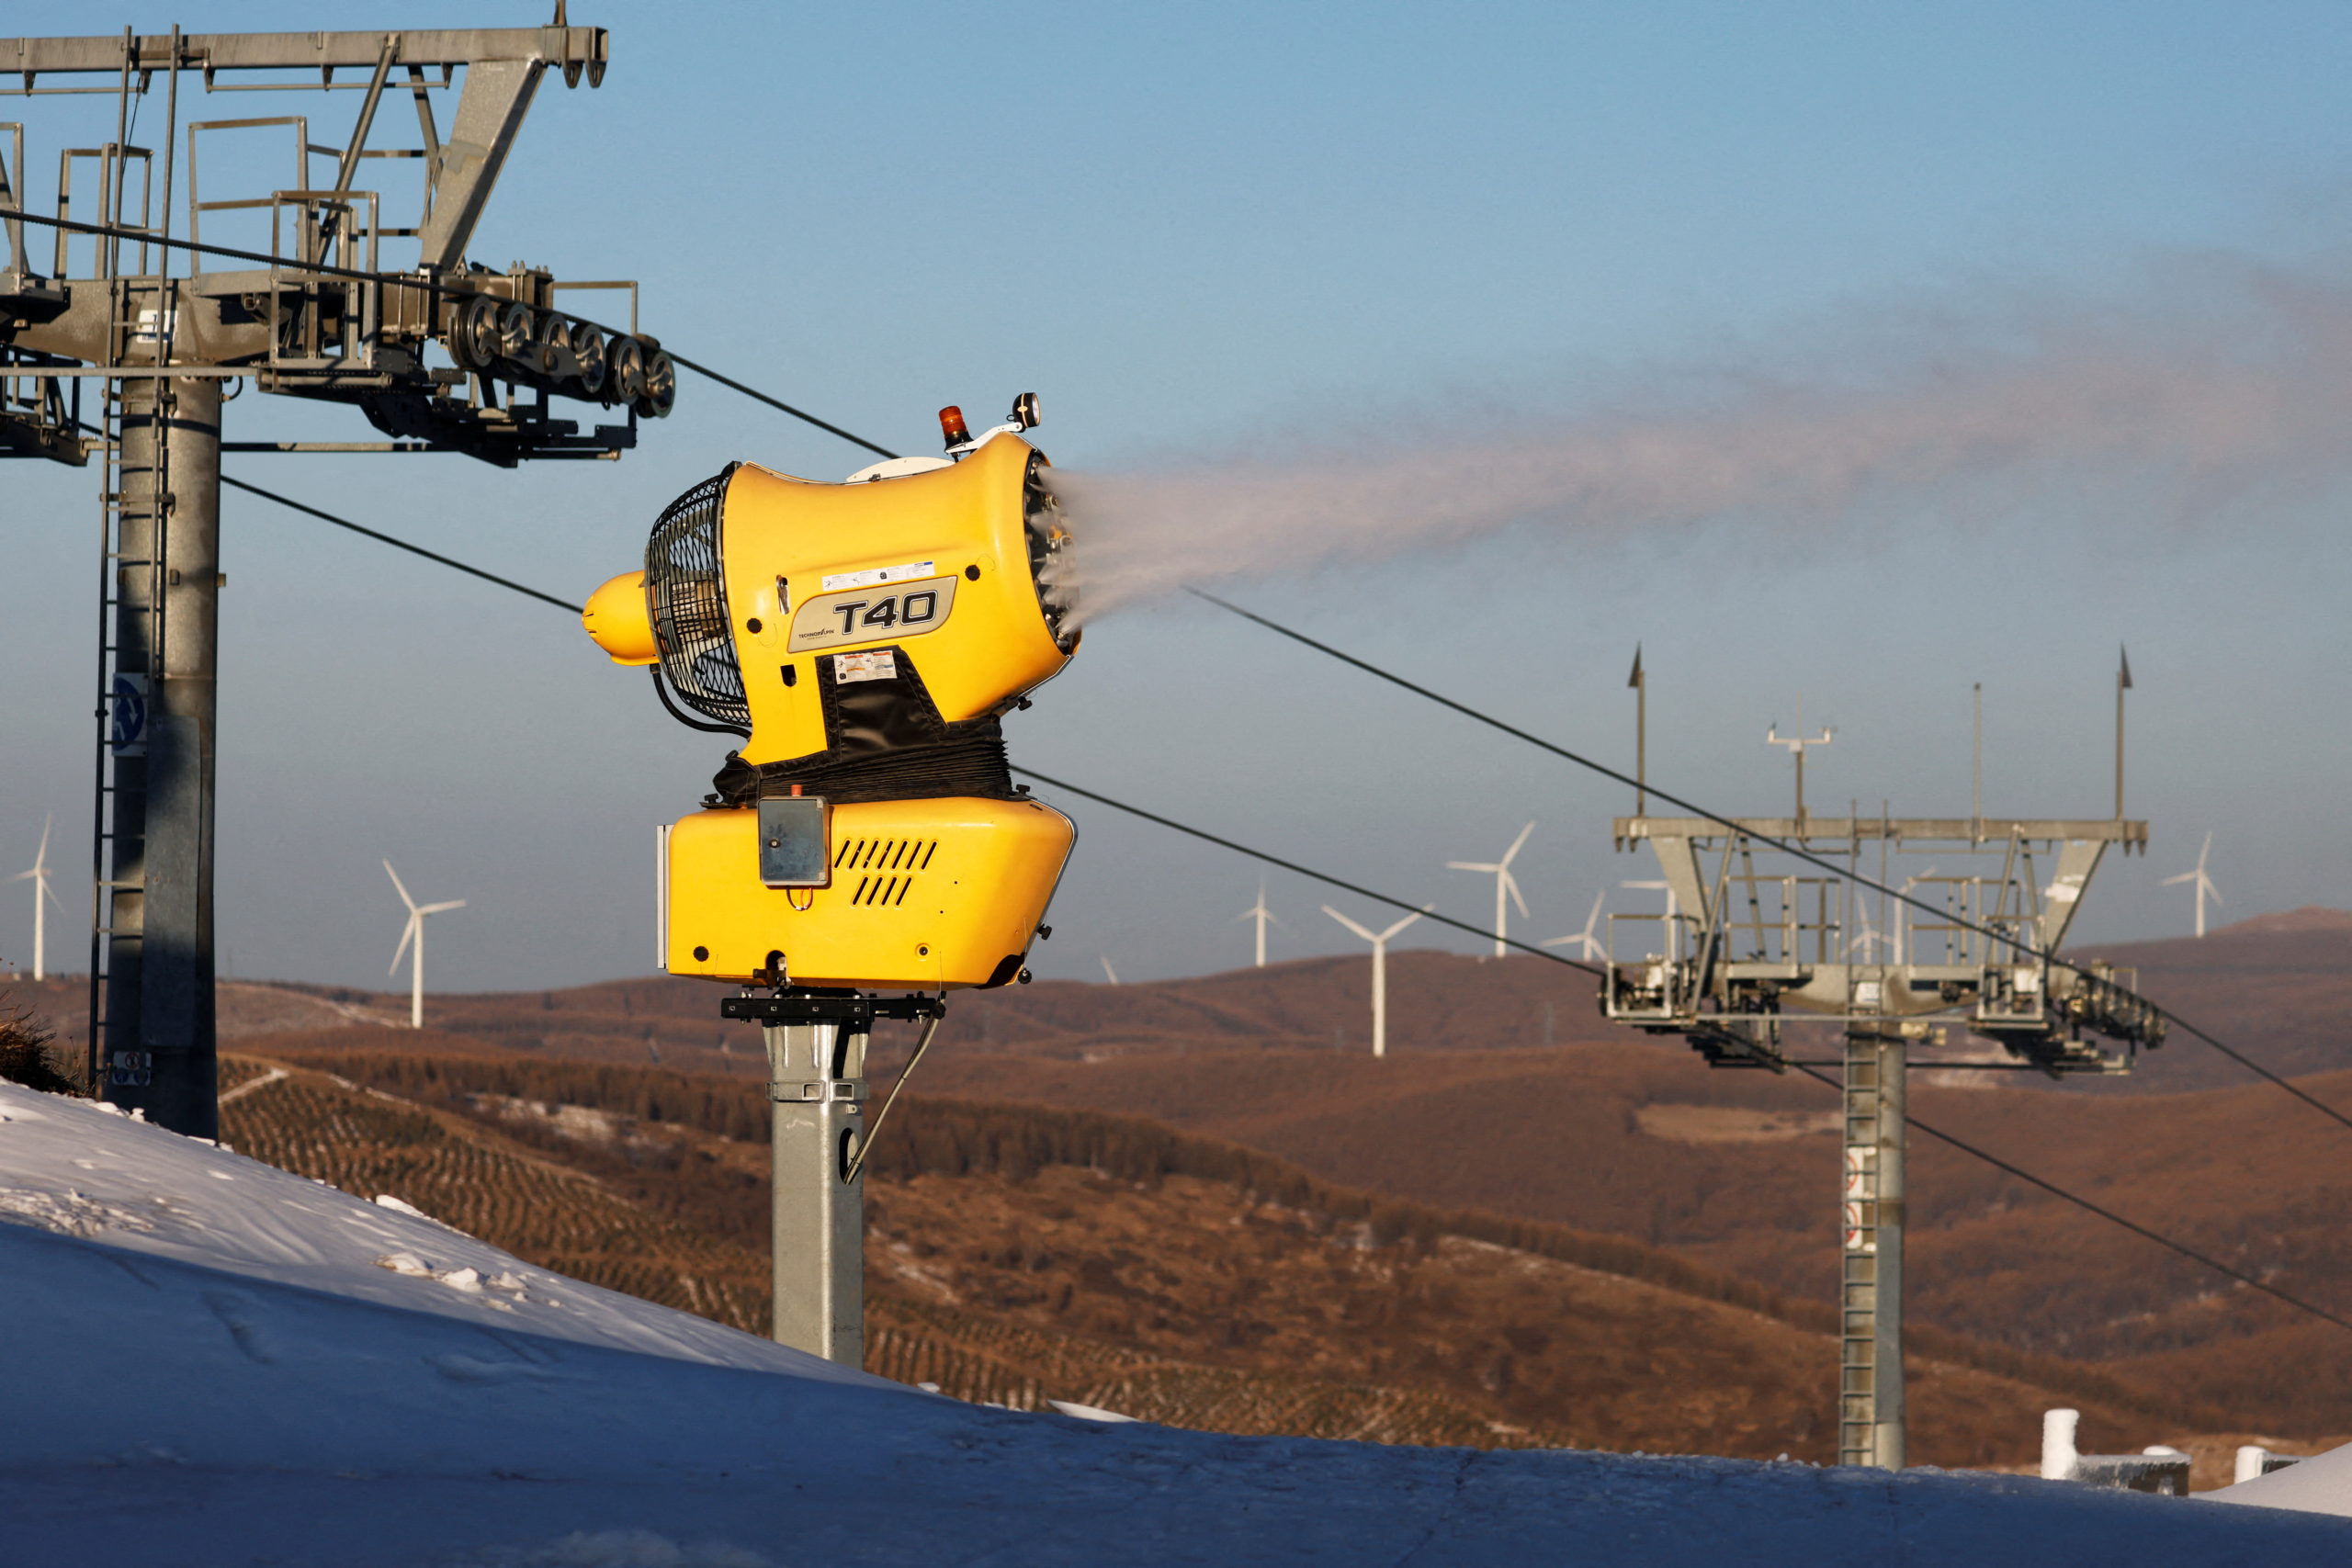 Wind turbines stand behind a snow gun operating at Genting Snow Park during a government-organised media tour to Beijing 2022 Winter Olympics venues in Zhangjiakou, Hebei province, China December 21, 2021. REUTERS/Carlos Ga